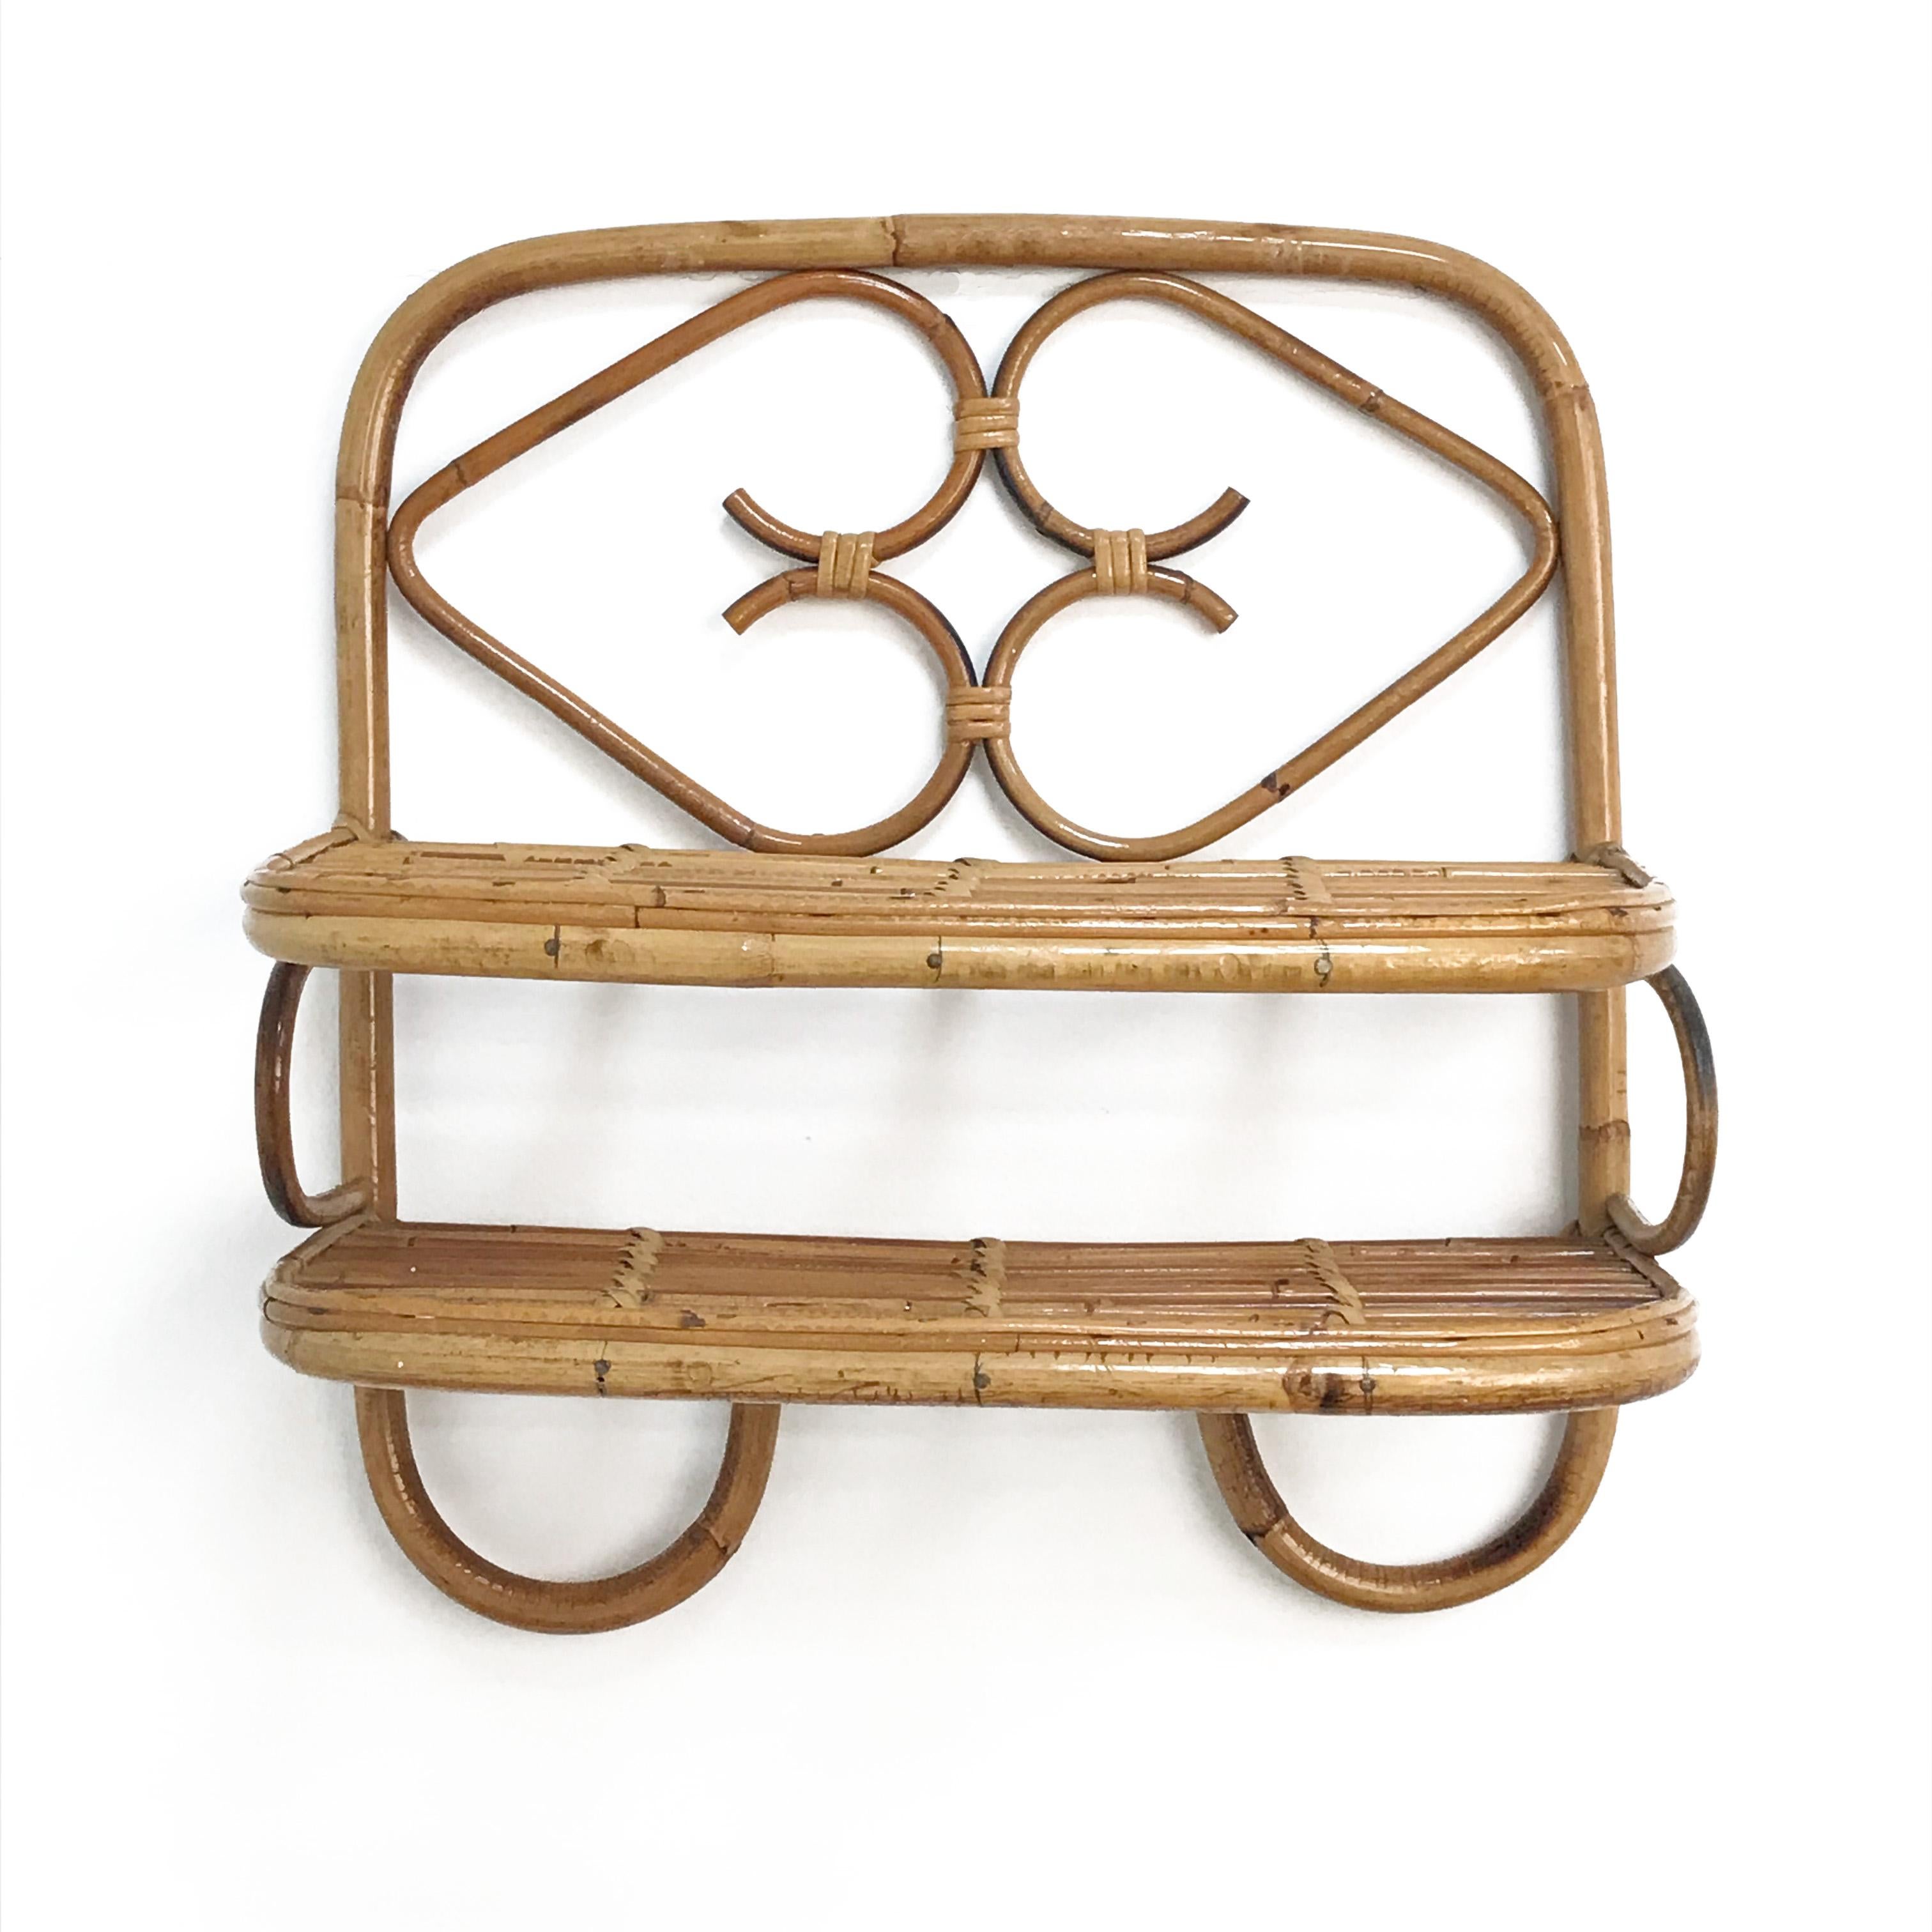 Amazing midcentury bamboo and rattan shelf or hanging side table. This wonderful piece was produced in Italy during 1960s.

This elegant item is unique as it has two rattan shelves with two hearts decorating the top one.

A multipurpose shelf that